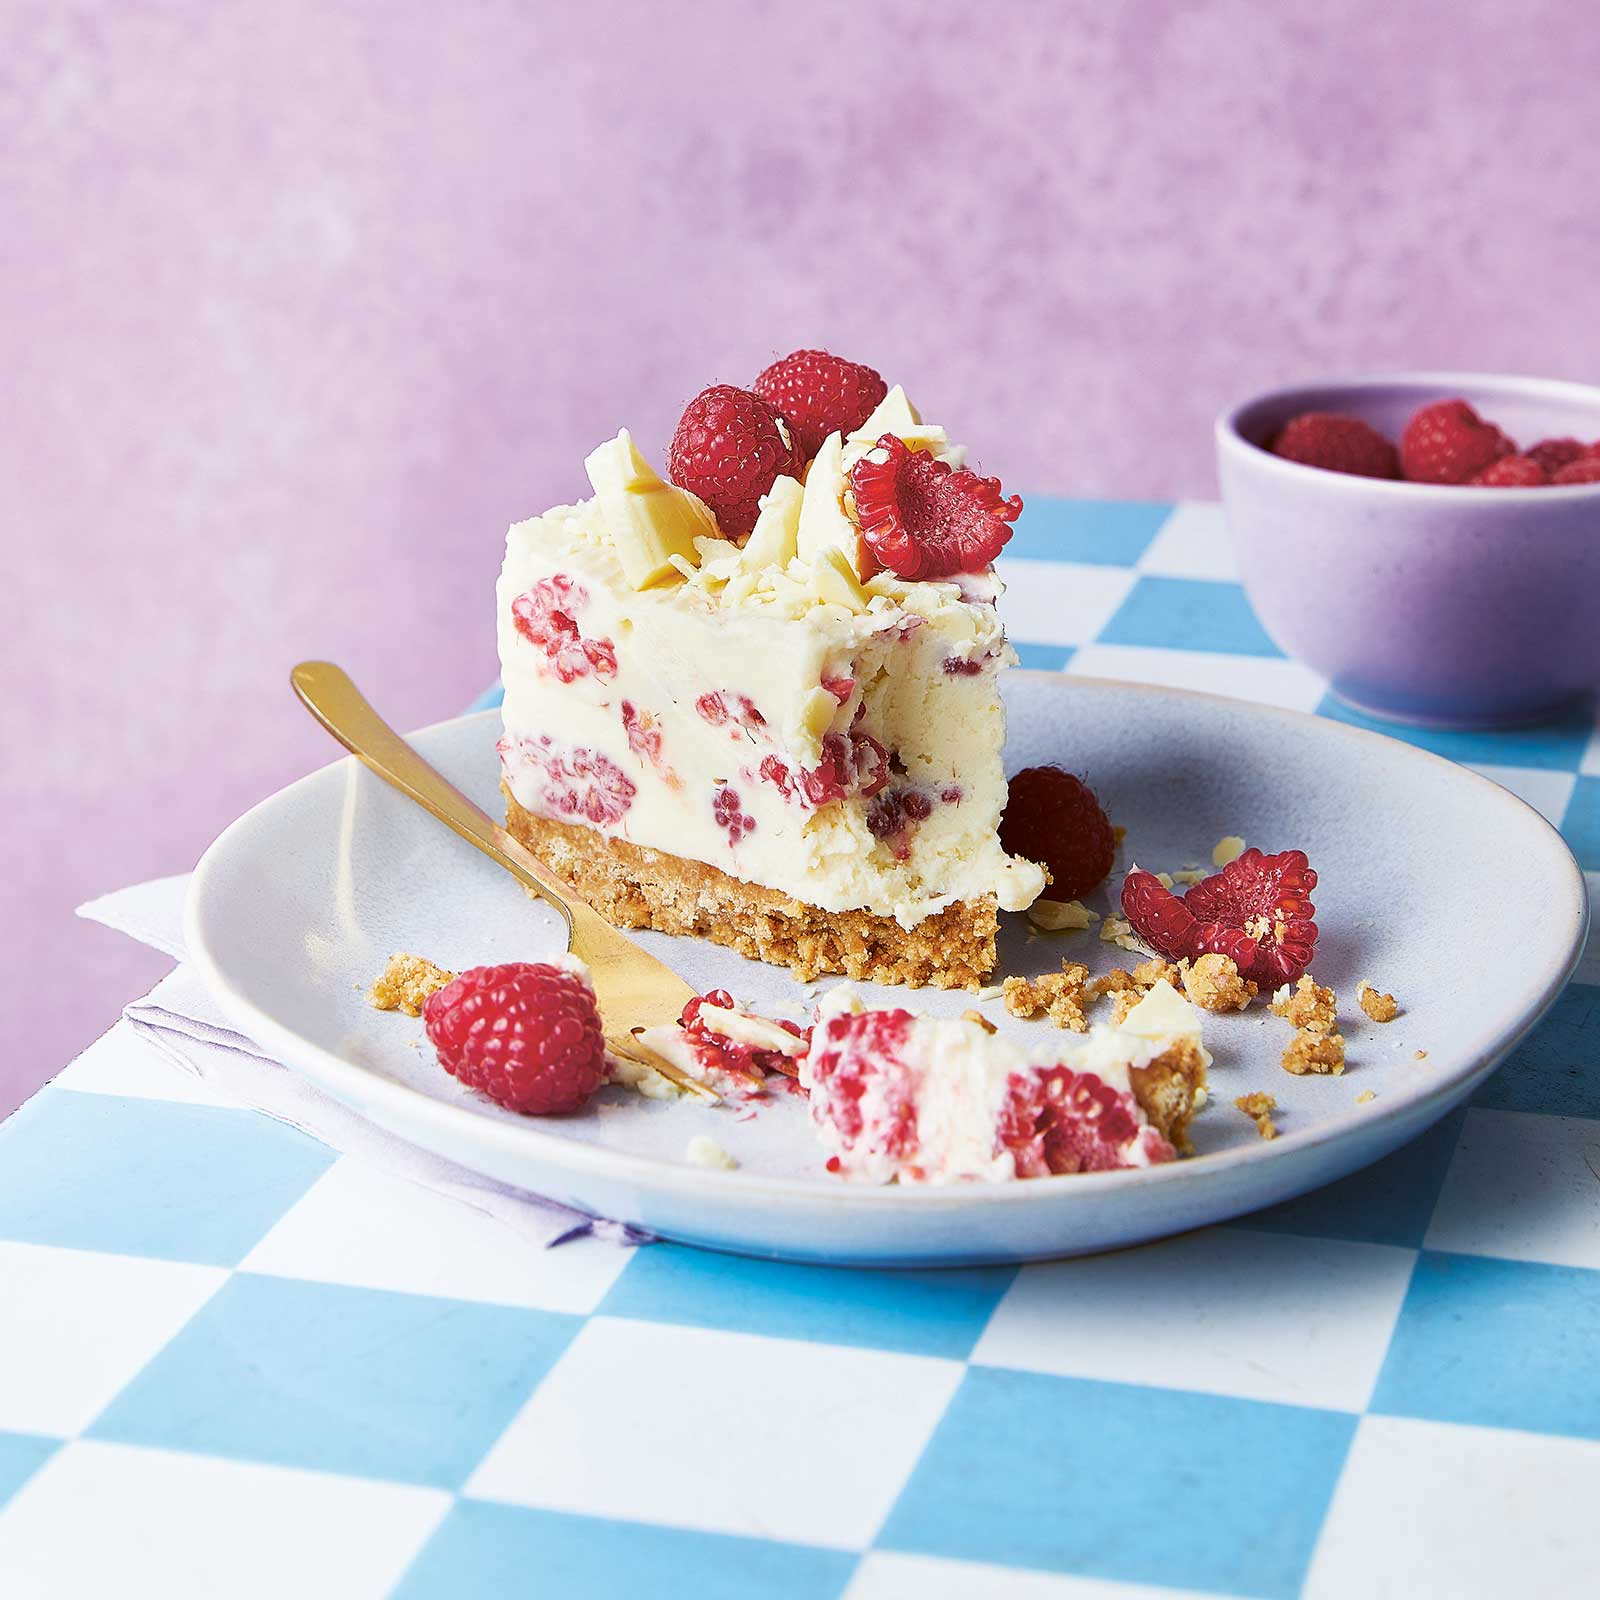 A slice of white chocolate no-bake cheese cake it on a plate, half of the cheesecake has been eaten and there are crumbs and a fork on the plate. The plate rests on a table with a blue and white check table cloth. Next to the plate is a purple bowl with fresh raspberries.